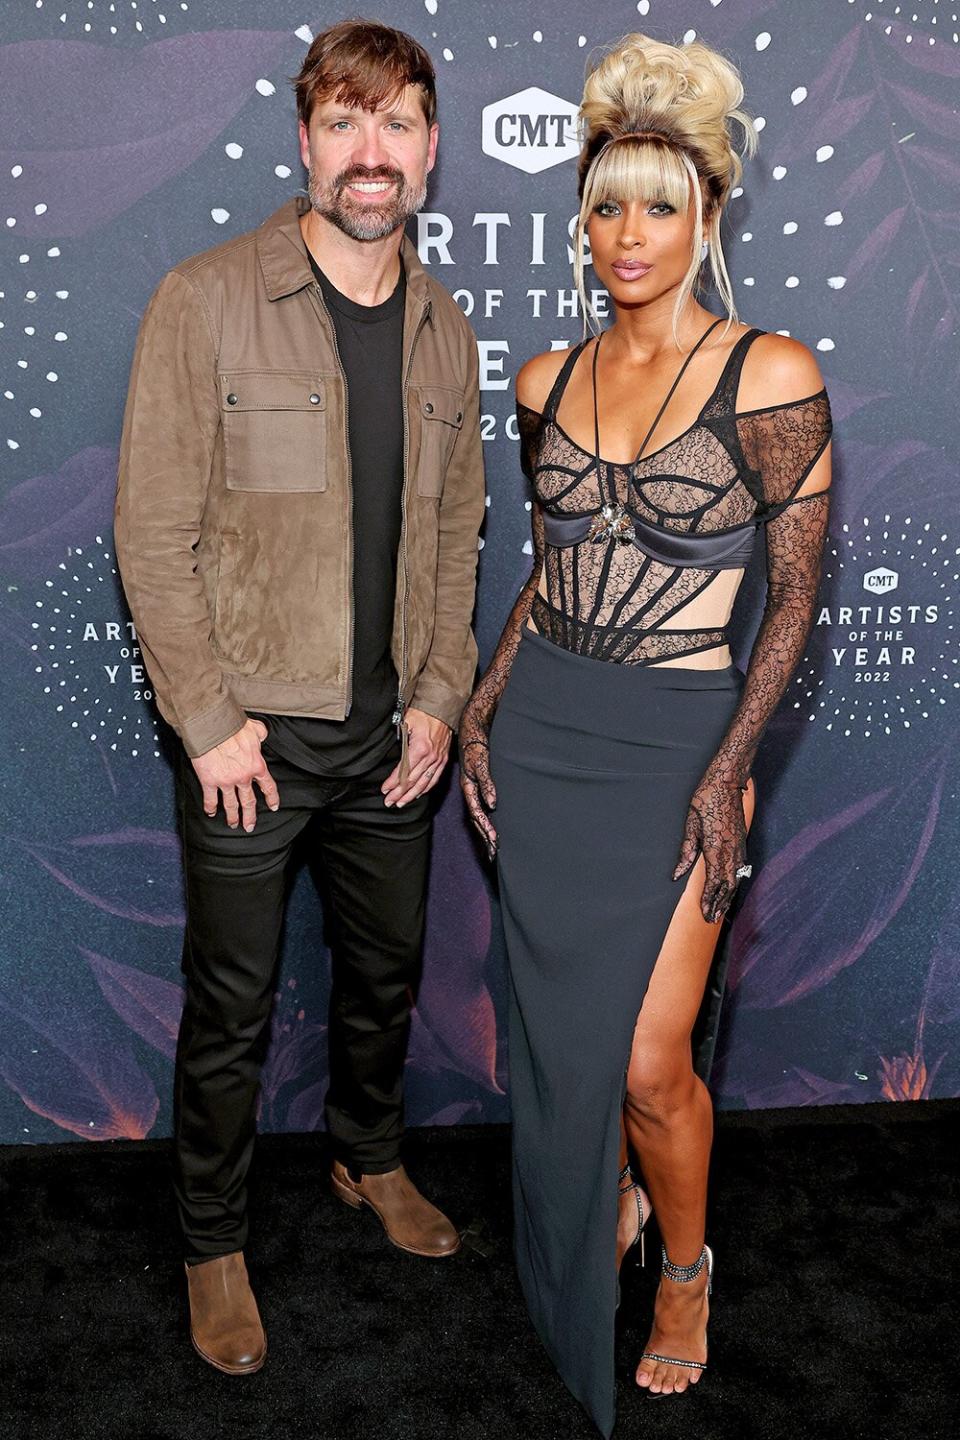 NASHVILLE, TENNESSEE - OCTOBER 12: Walker Hayes and Ciara attend the 2022 CMT Artists Of The Year at Schermerhorn Symphony Center on October 12, 2022 in Nashville, Tennessee. (Photo by Terry Wyatt/Getty Images)